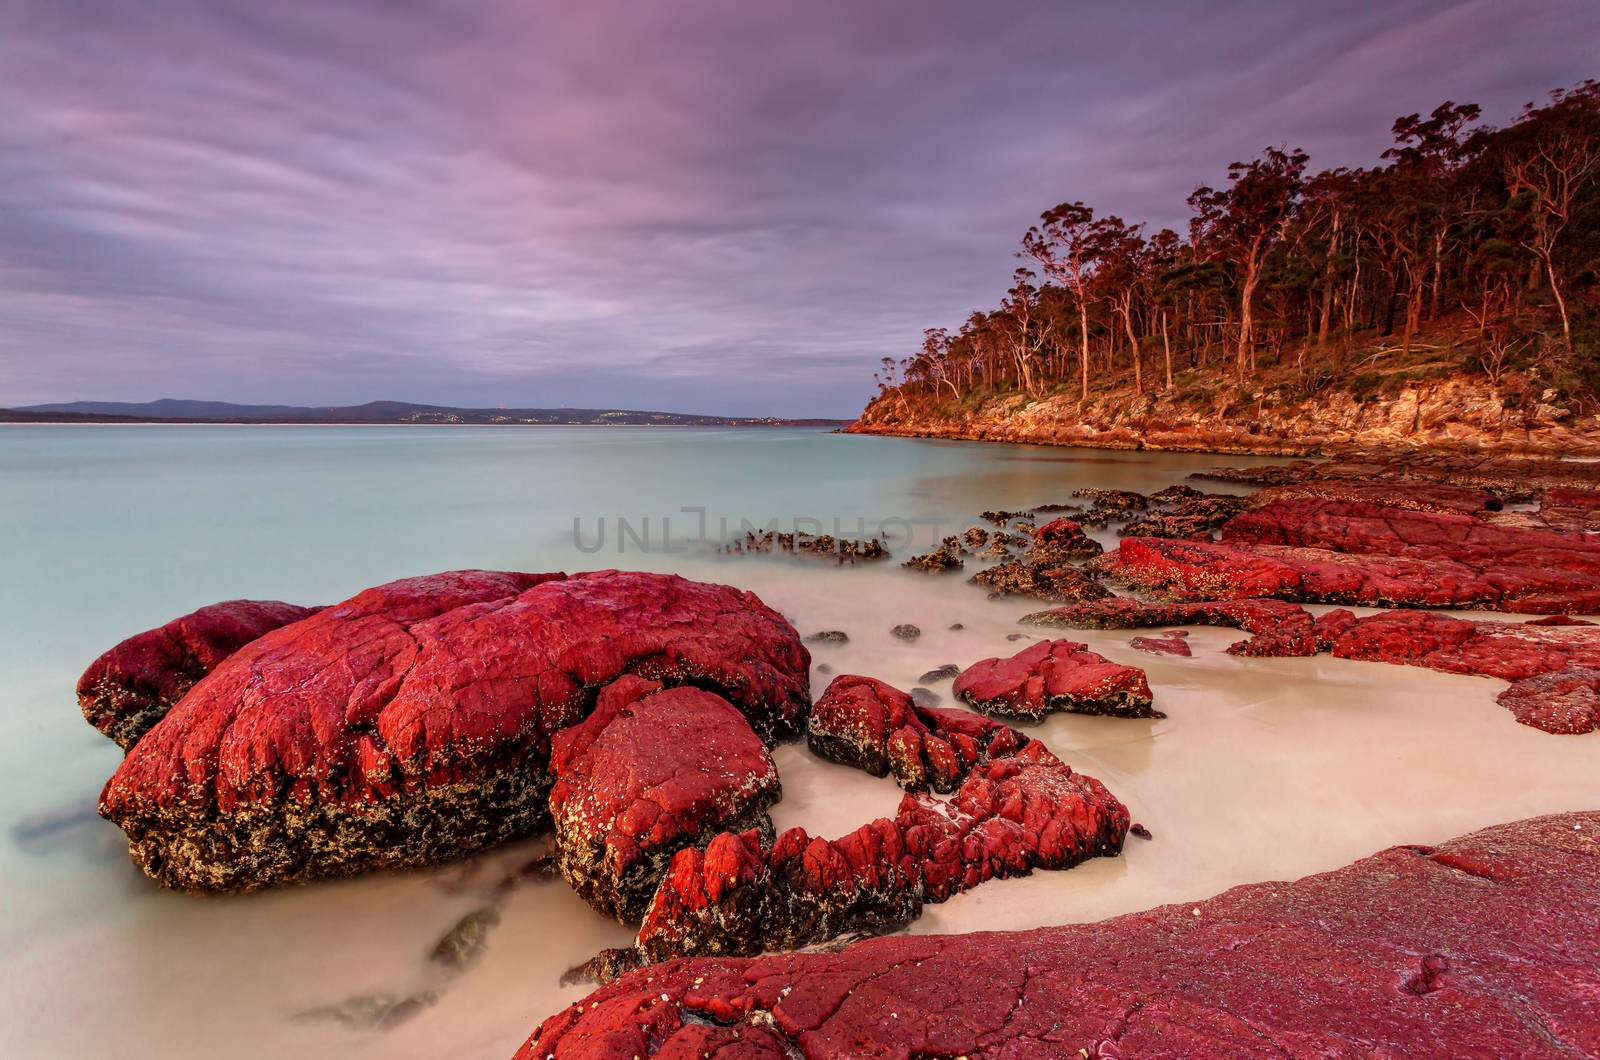 Sunset casting warm light onto the rich red rocks scattered along the beach contrasting against the blue of the waters